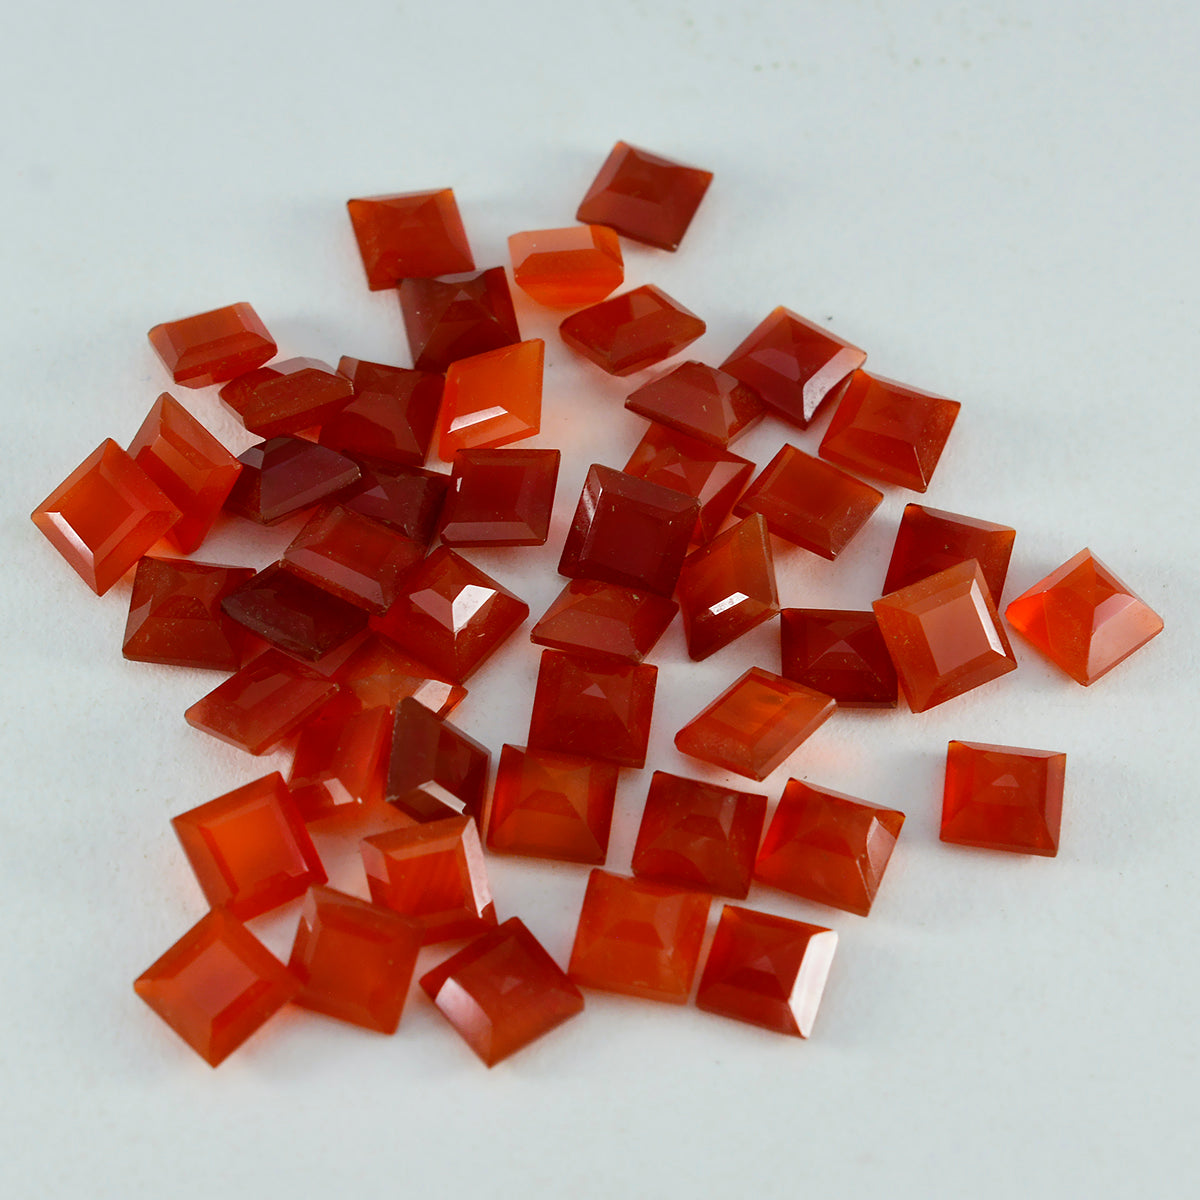 Riyogems 1PC Genuine Red Onyx Faceted 5x5 mm Square Shape nice-looking Quality Gems